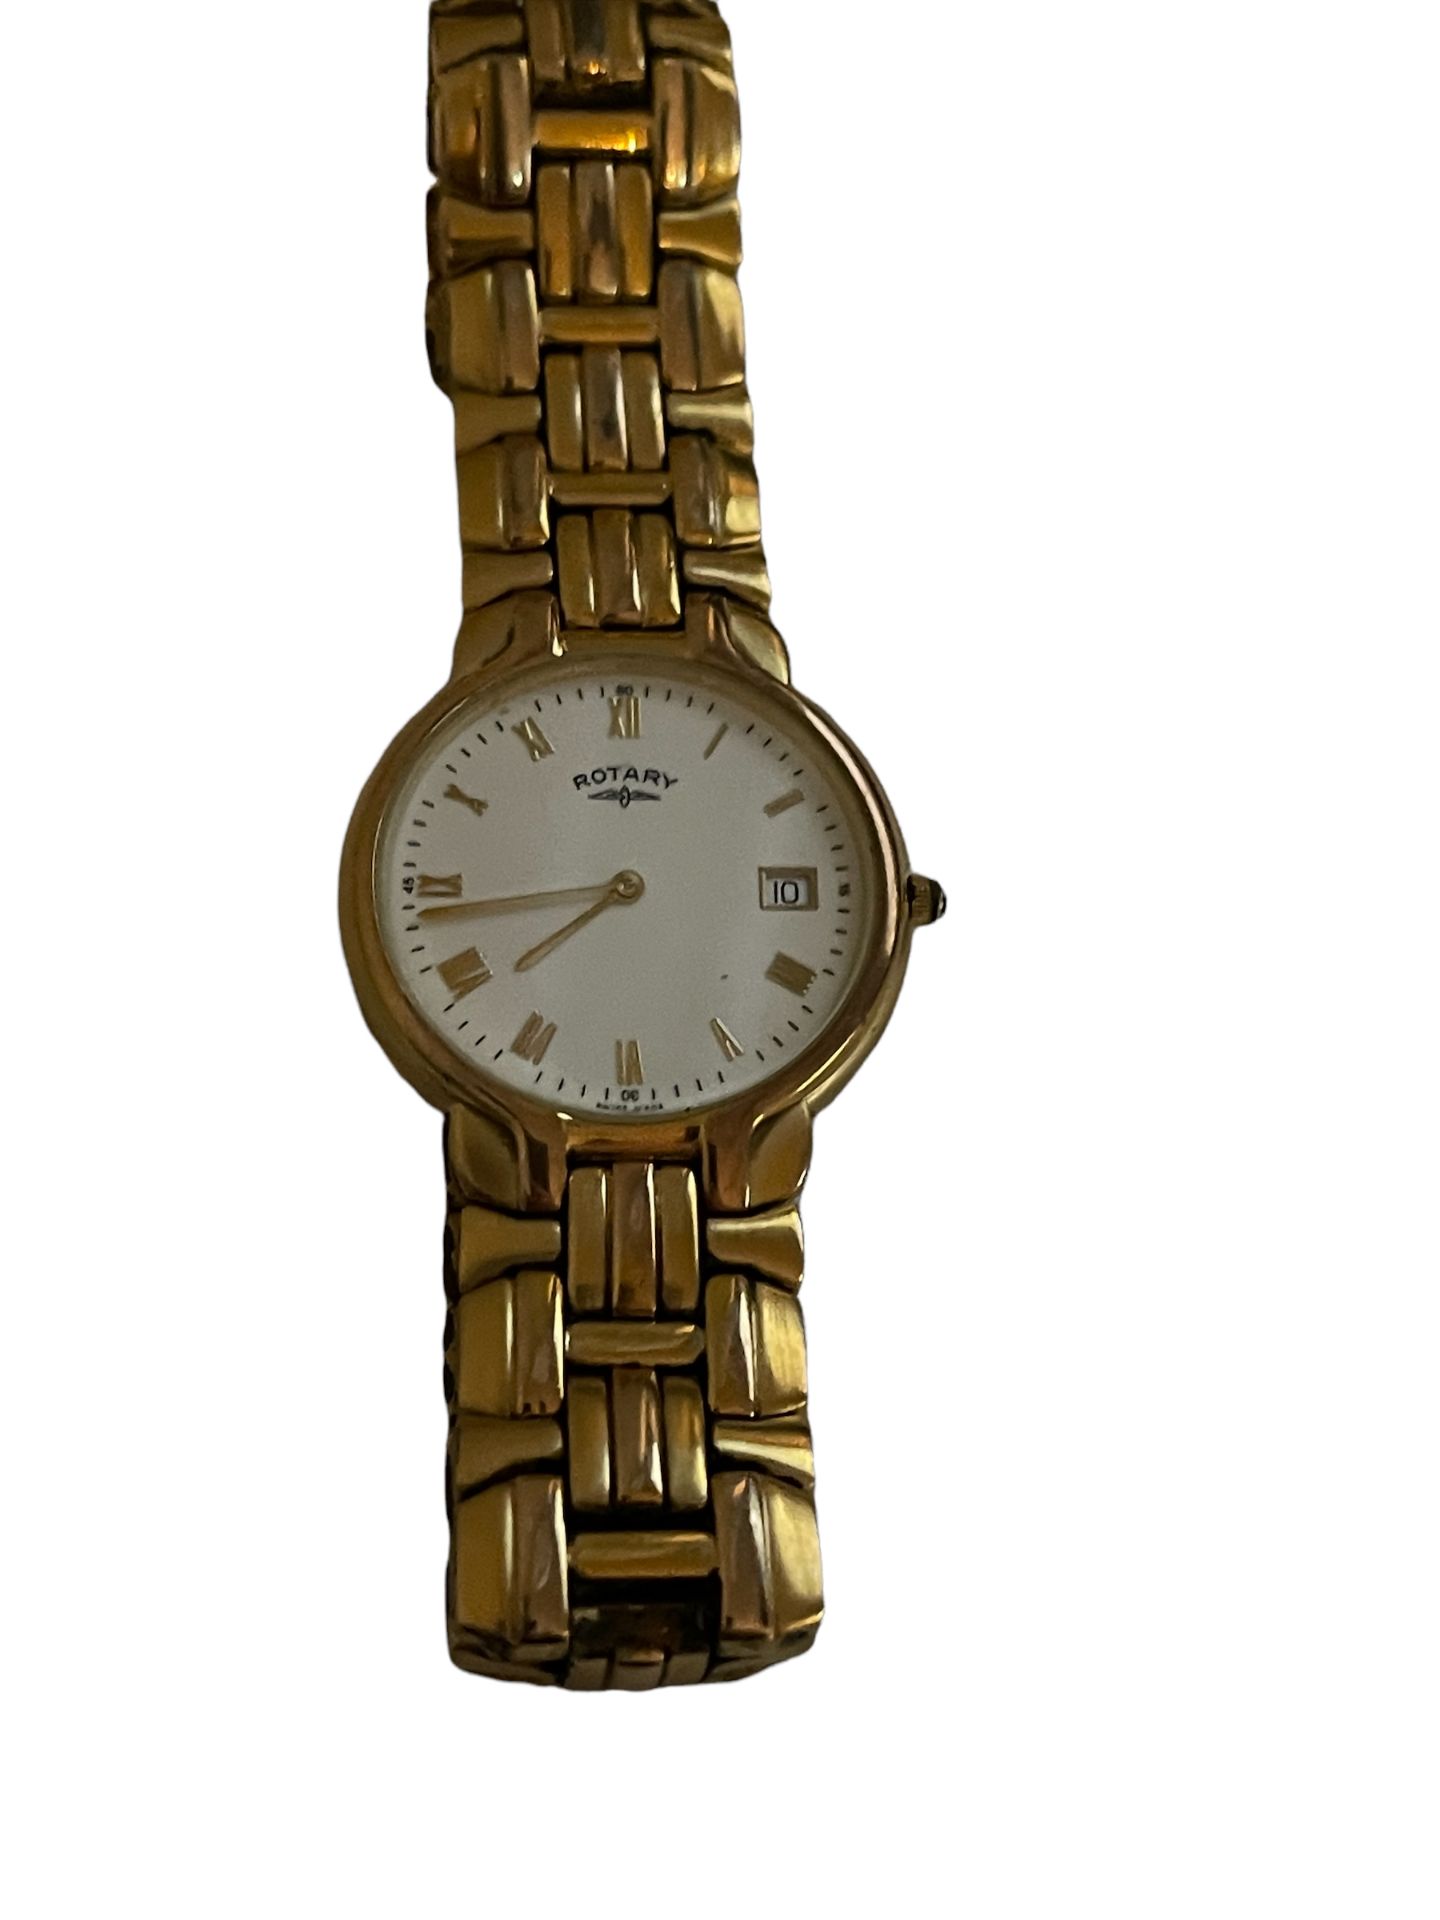 Mens Rotary Gold Plated Watch - Return Stock from our Private Jet Charter - Image 4 of 14